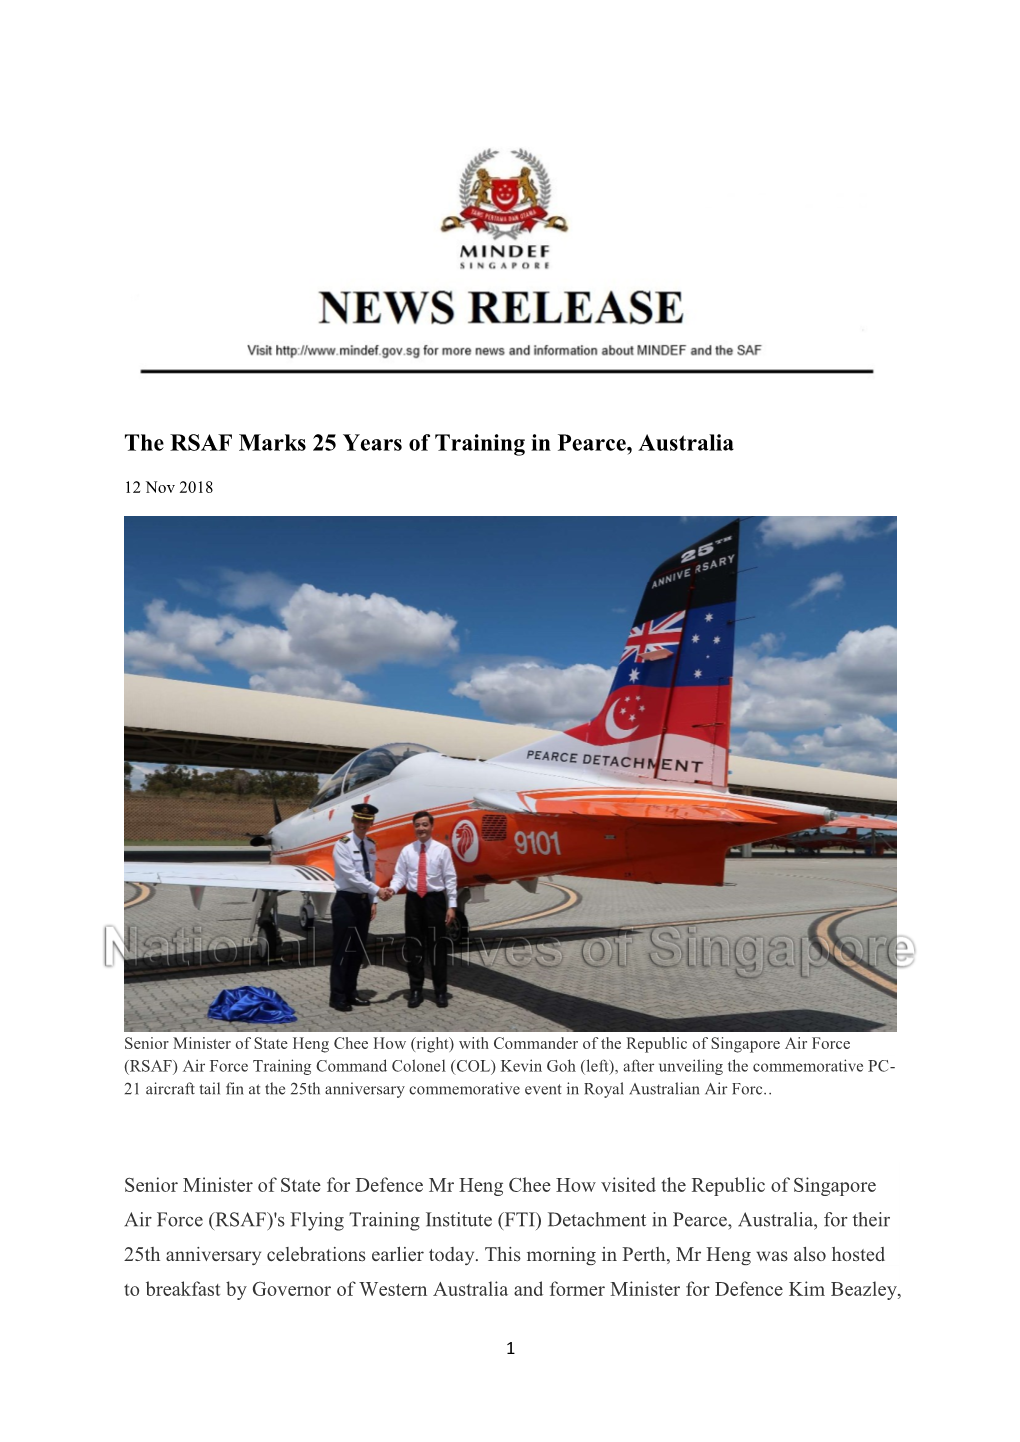 The RSAF Marks 25 Years of Training in Pearce, Australia